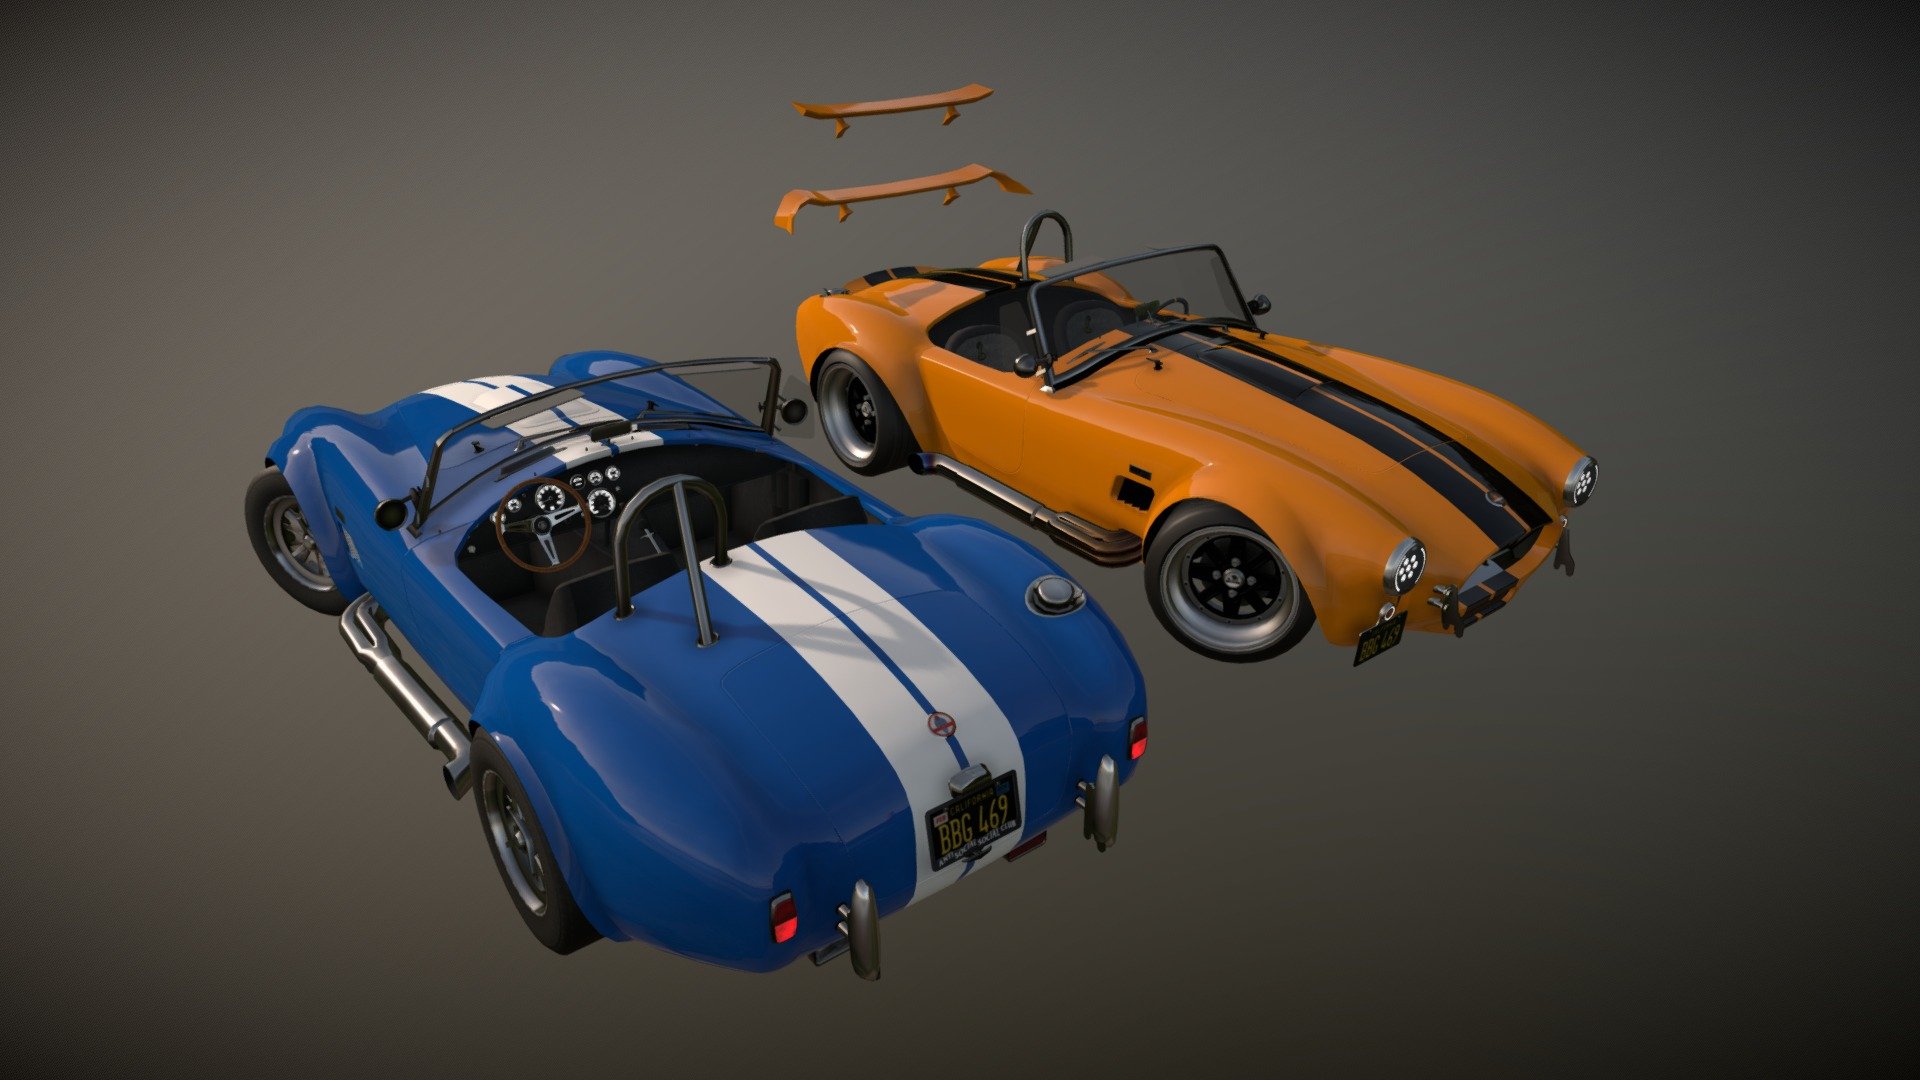 Ground-up body remodel of a 1965 Shelby Cobra 427. Two variants - Ford resto-mod, and stock. Fits Driver: San Francisco base model 3d model